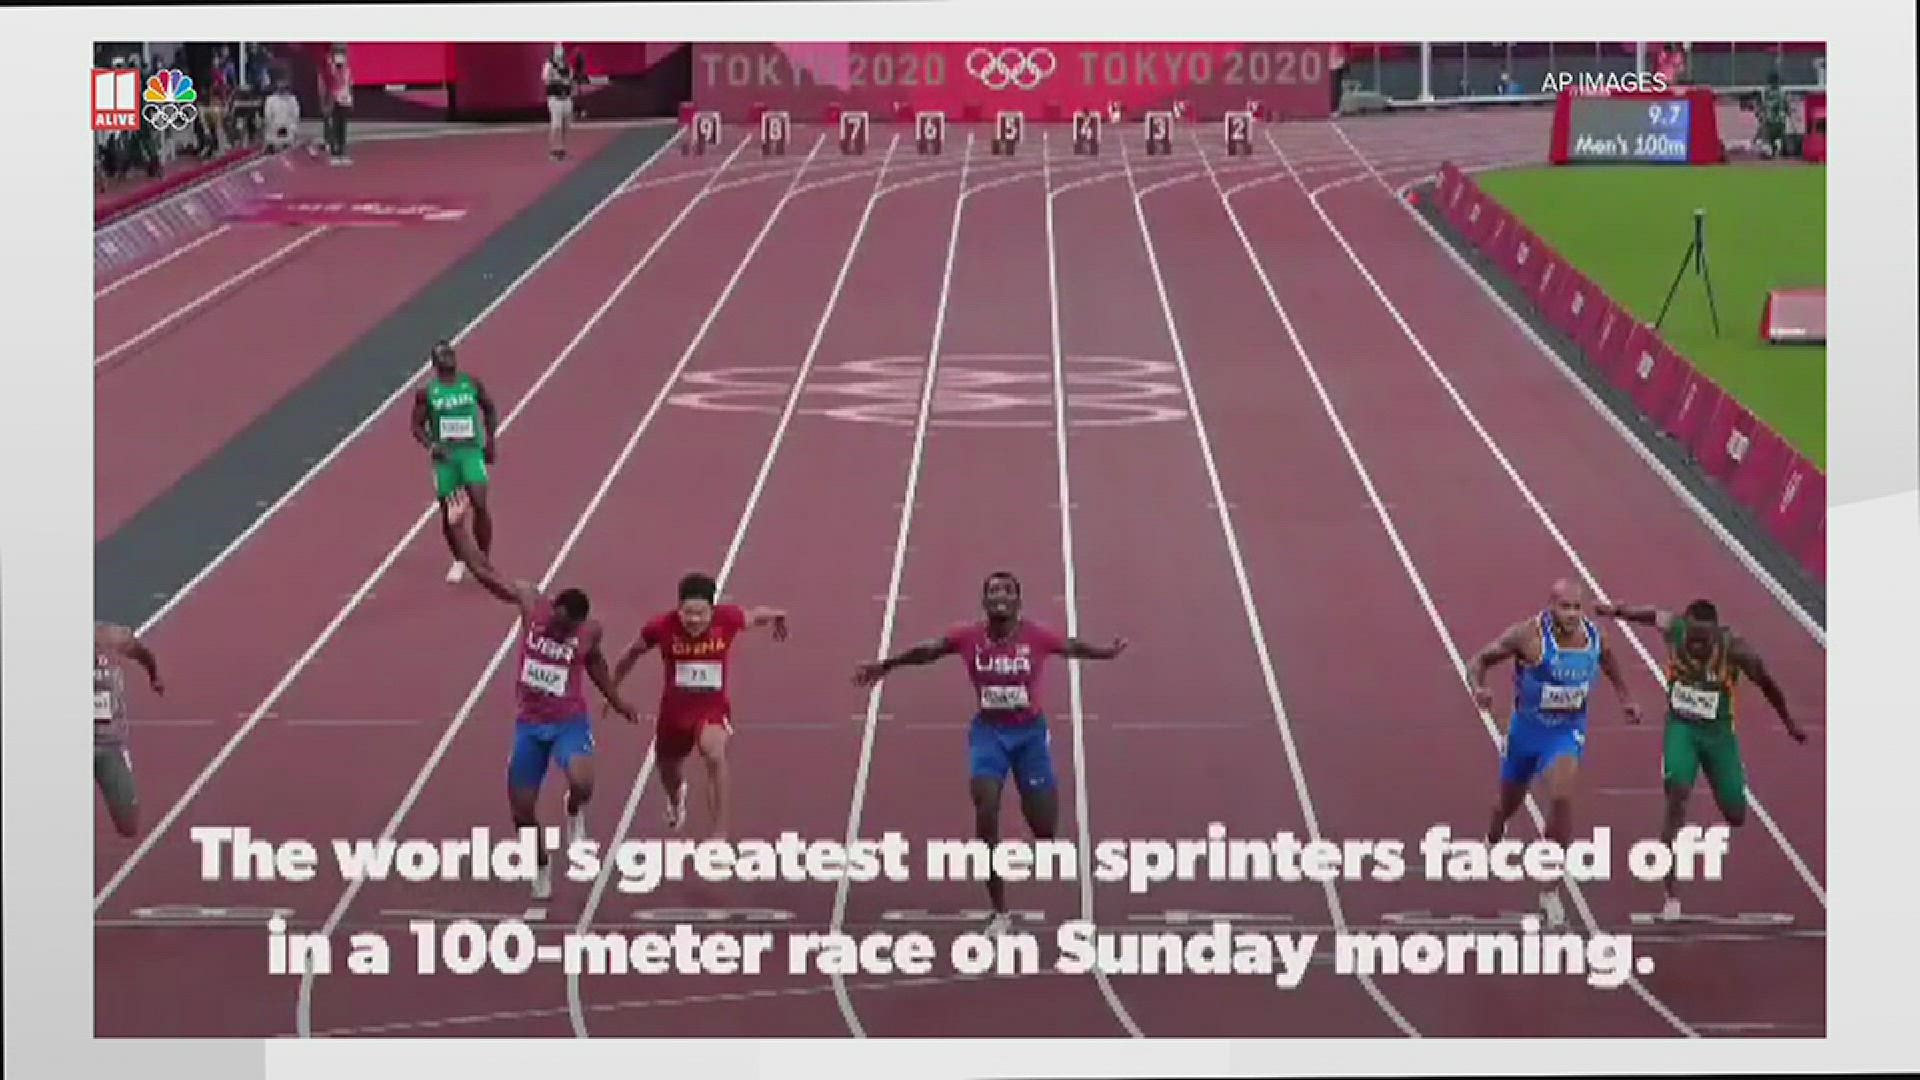 The world's greatest men sprinters faced off in a 100-meter race on